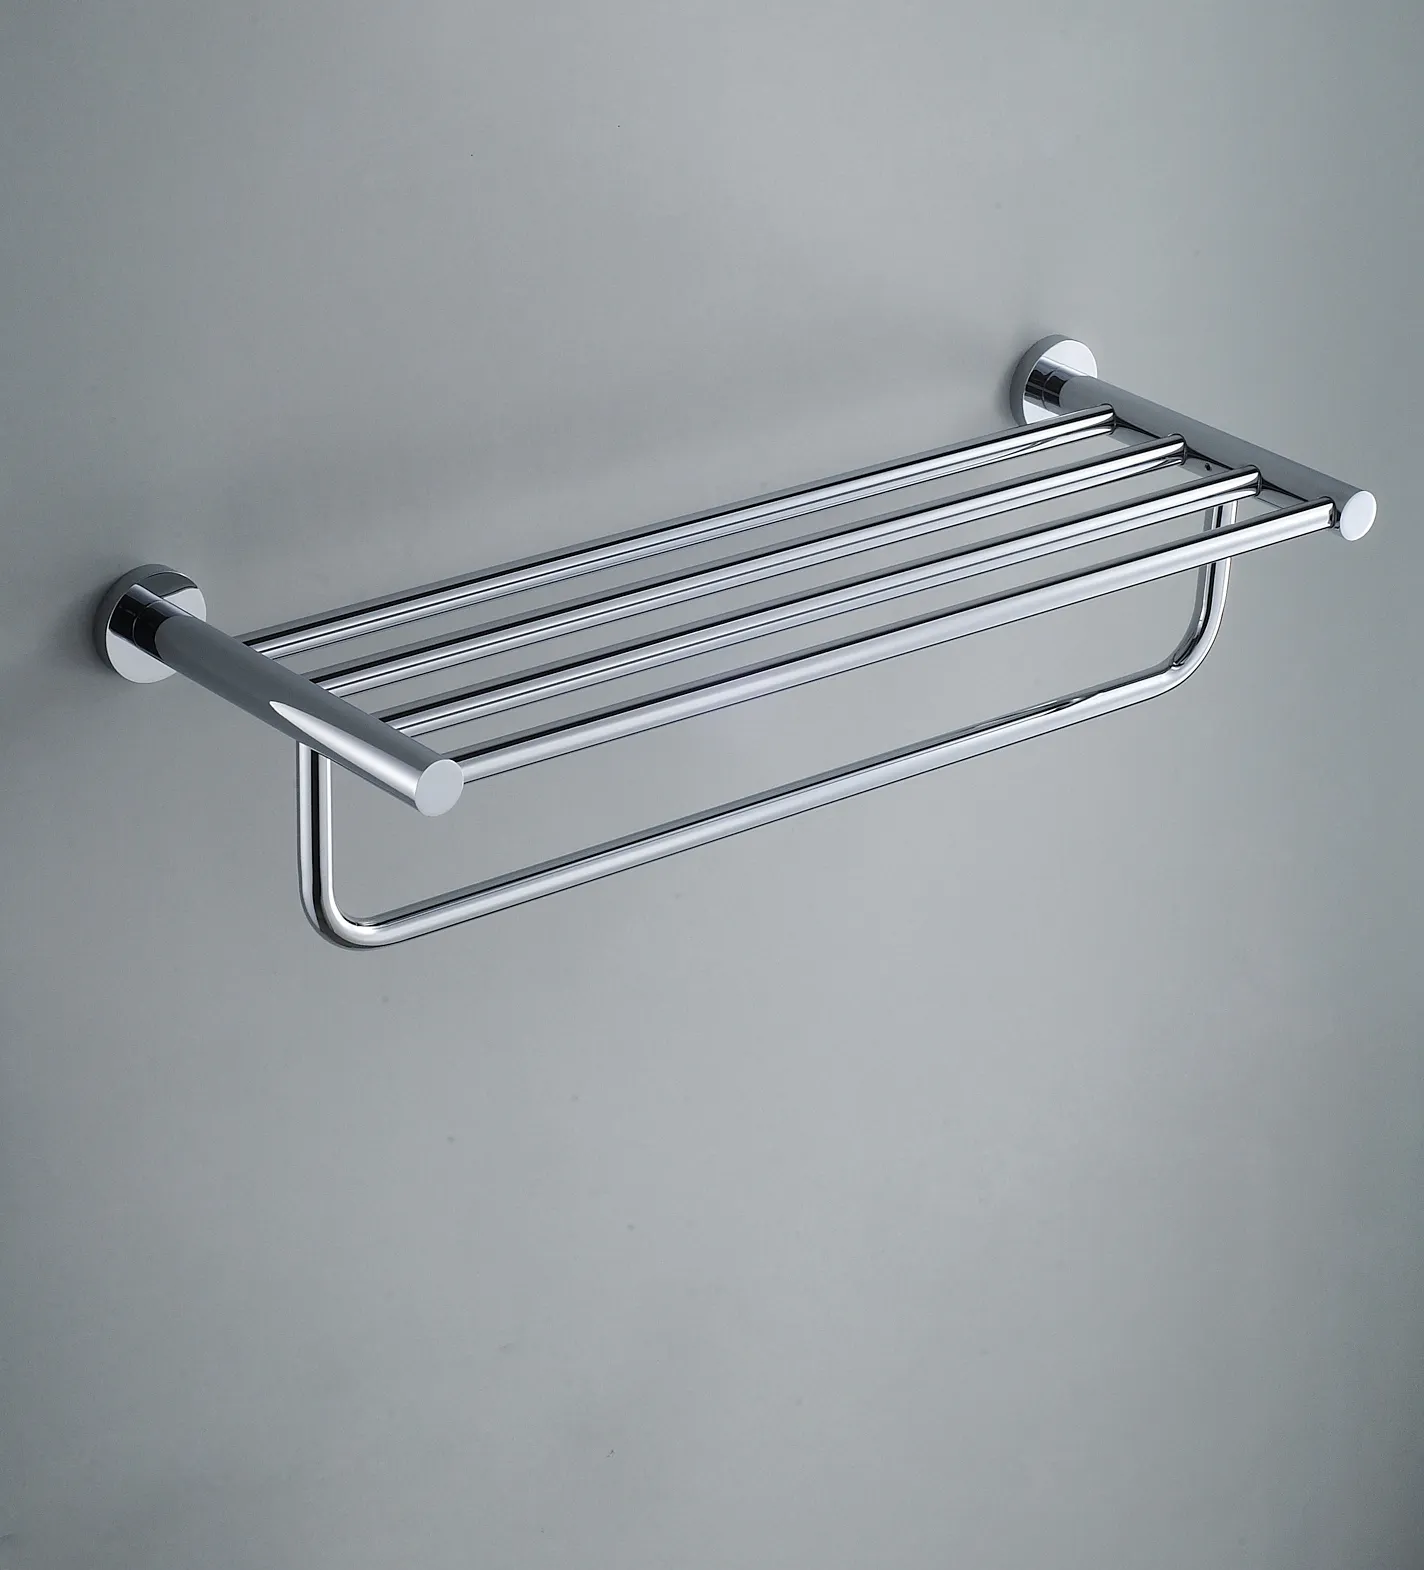 Factory outlet Deluxe Bathroom Accessories Wall Mounted Chromed Shower Towel Rack Hand Towel Shelf